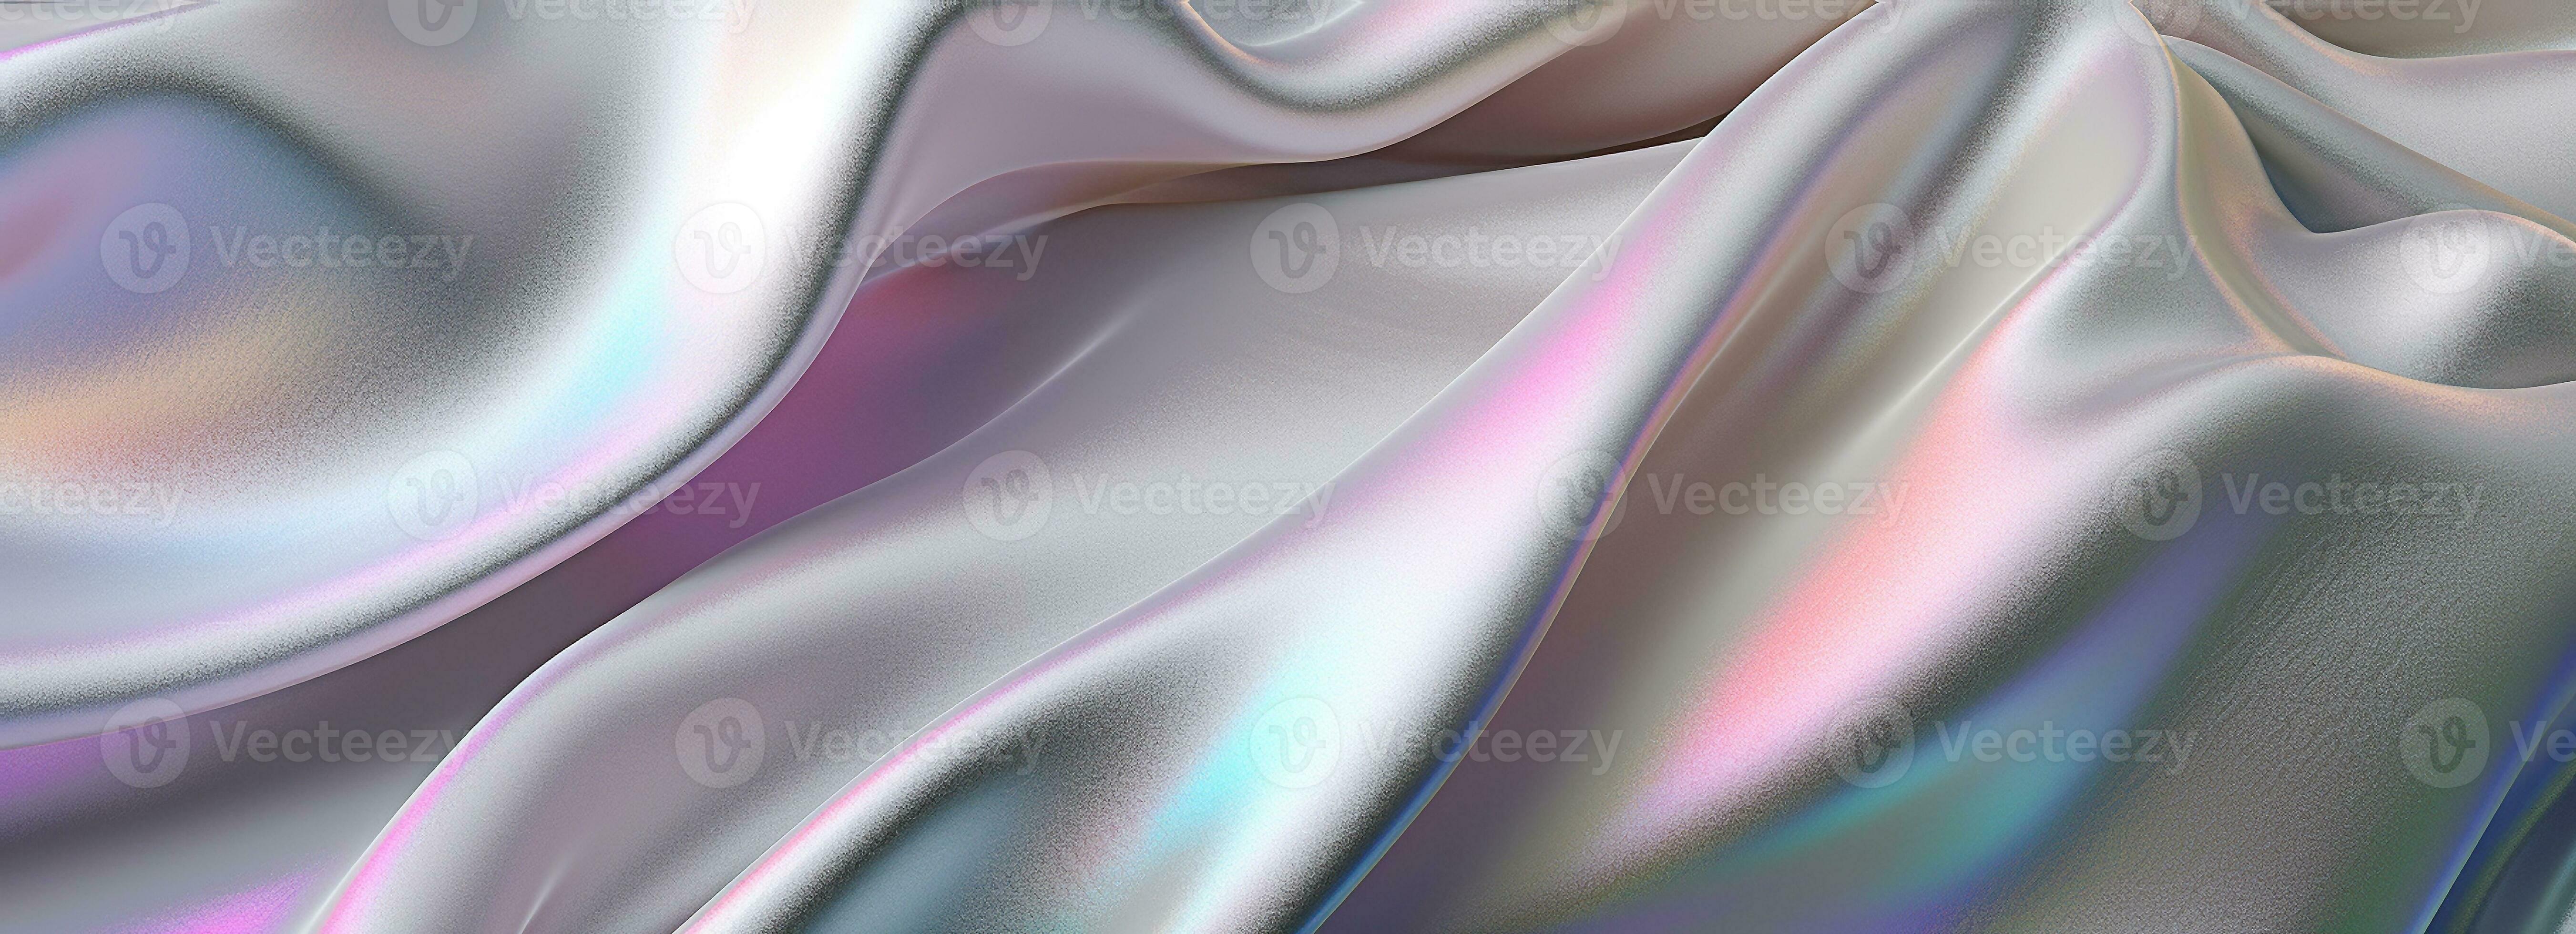 A close up of some fabric - Silk